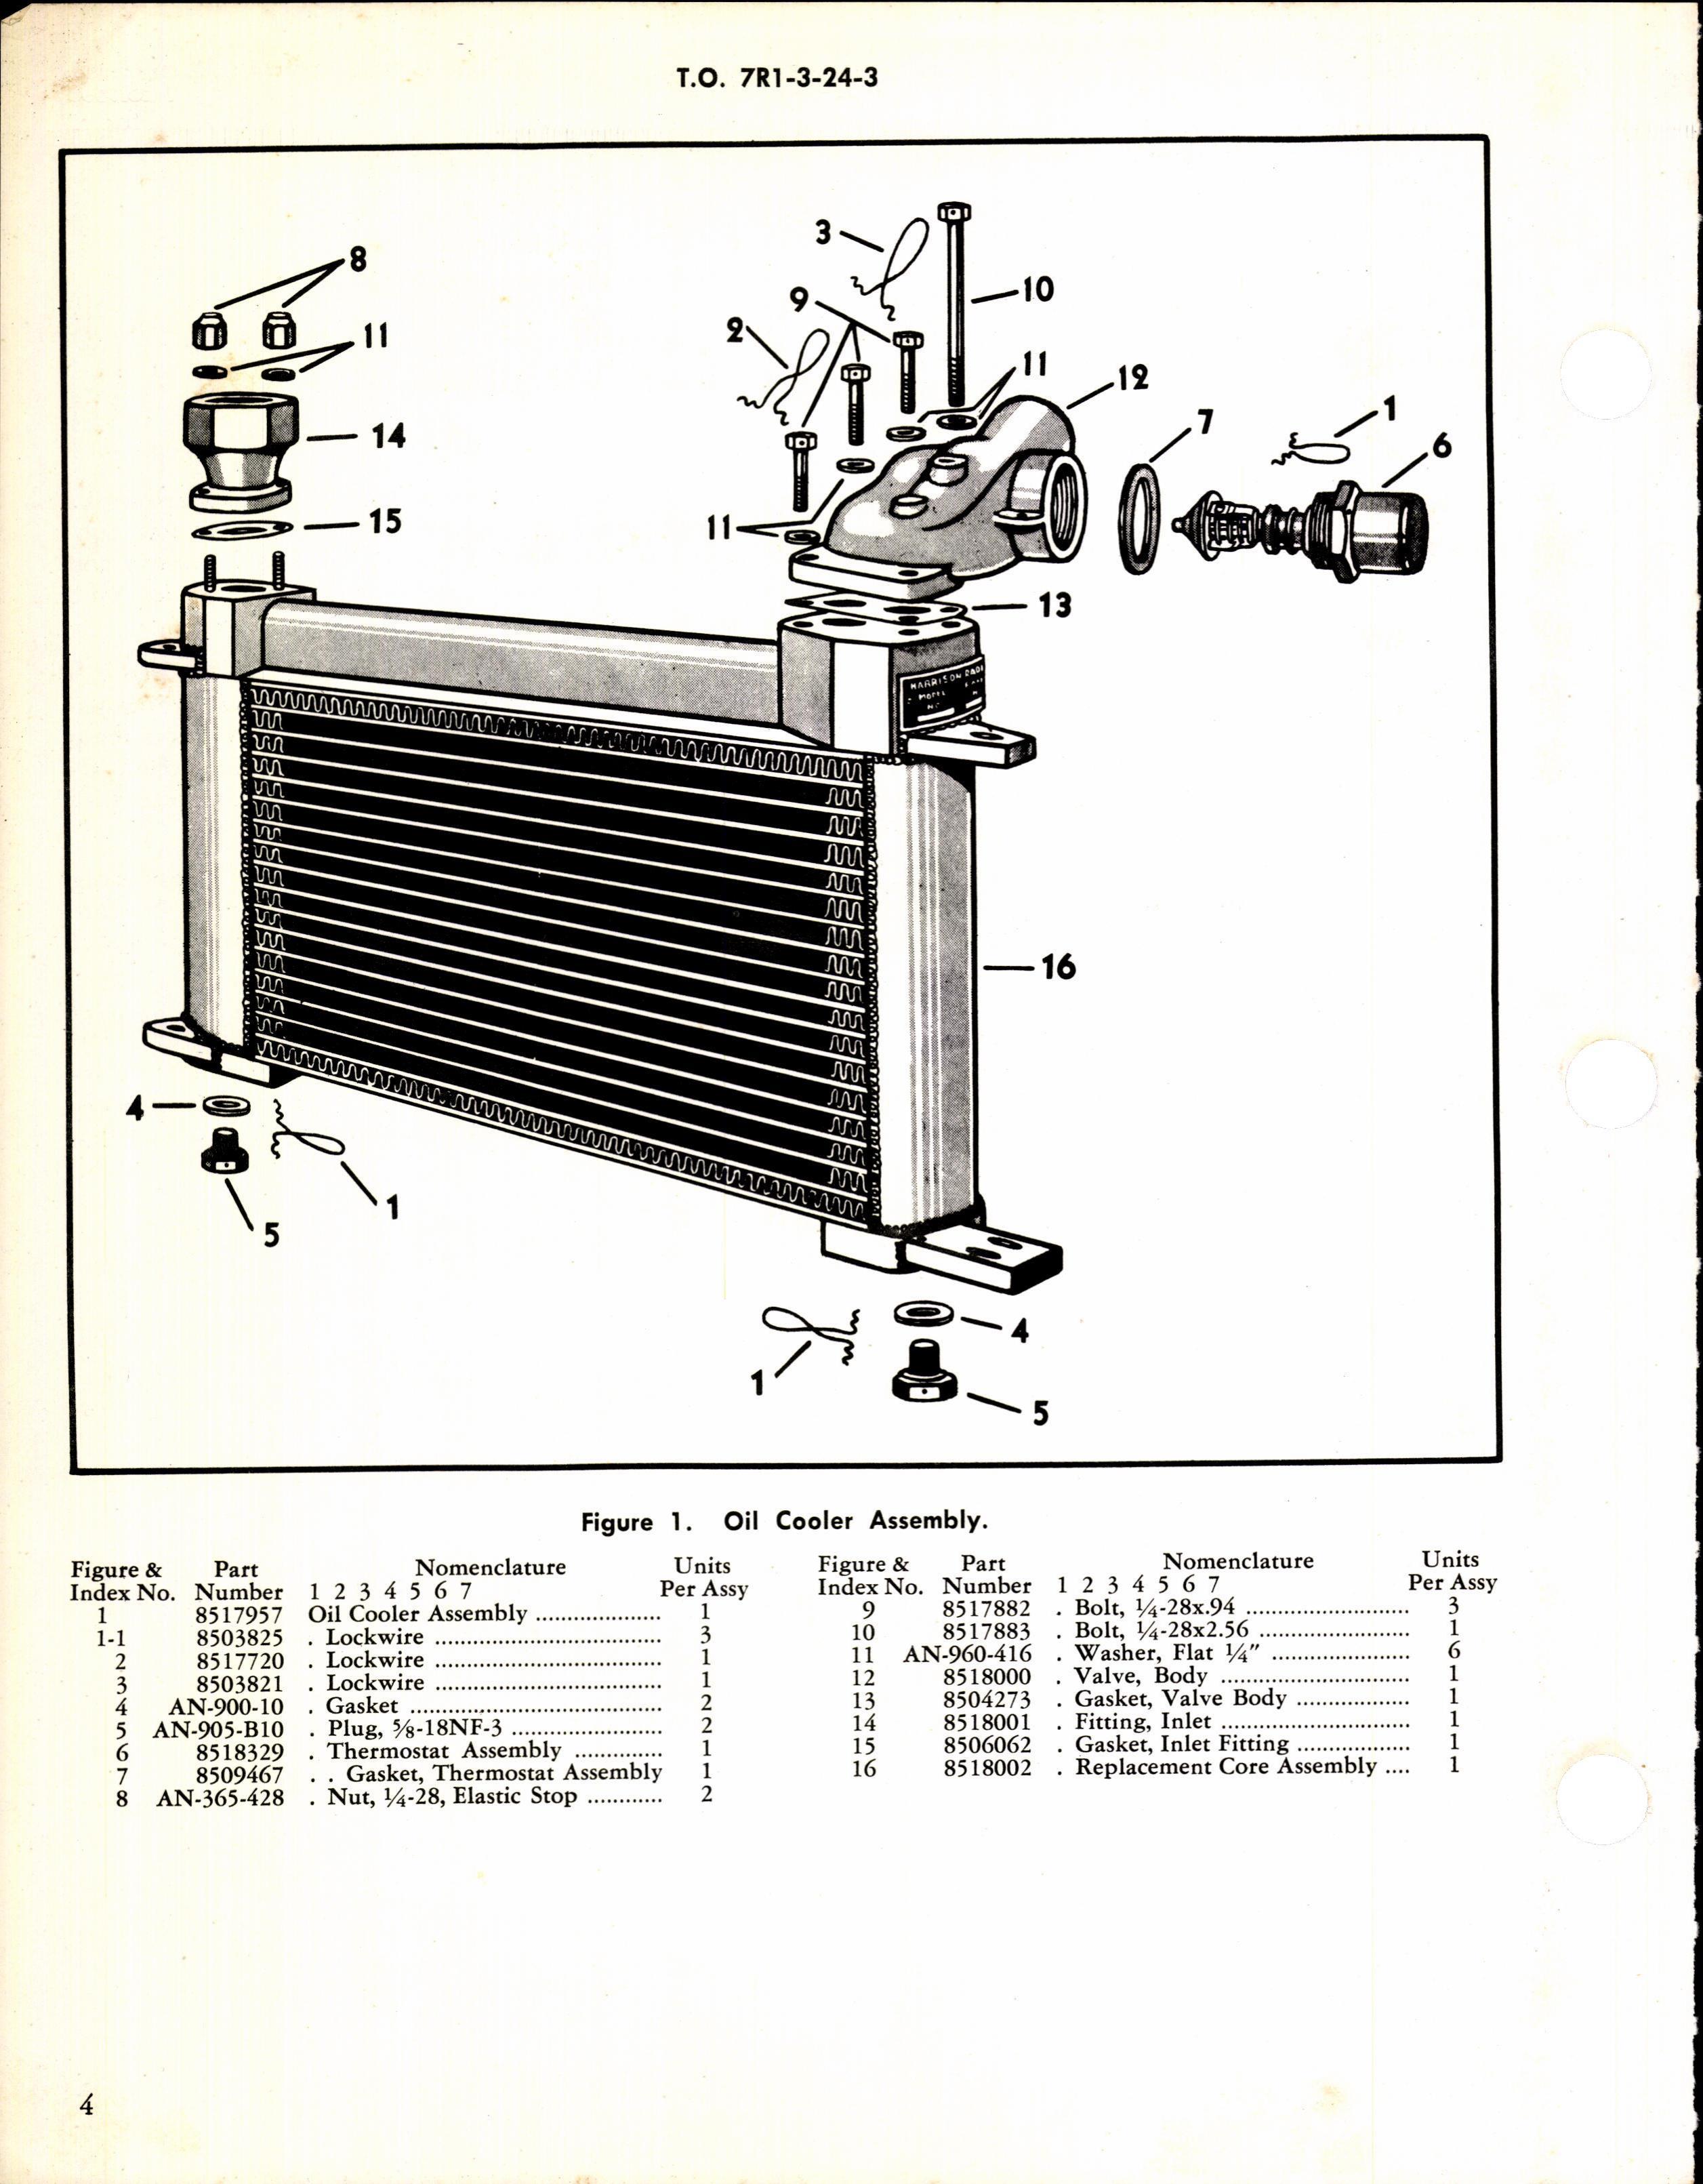 Sample page 4 from AirCorps Library document: Overhaul Instructions with Parts Breakdown for Oil Cooler Assembly